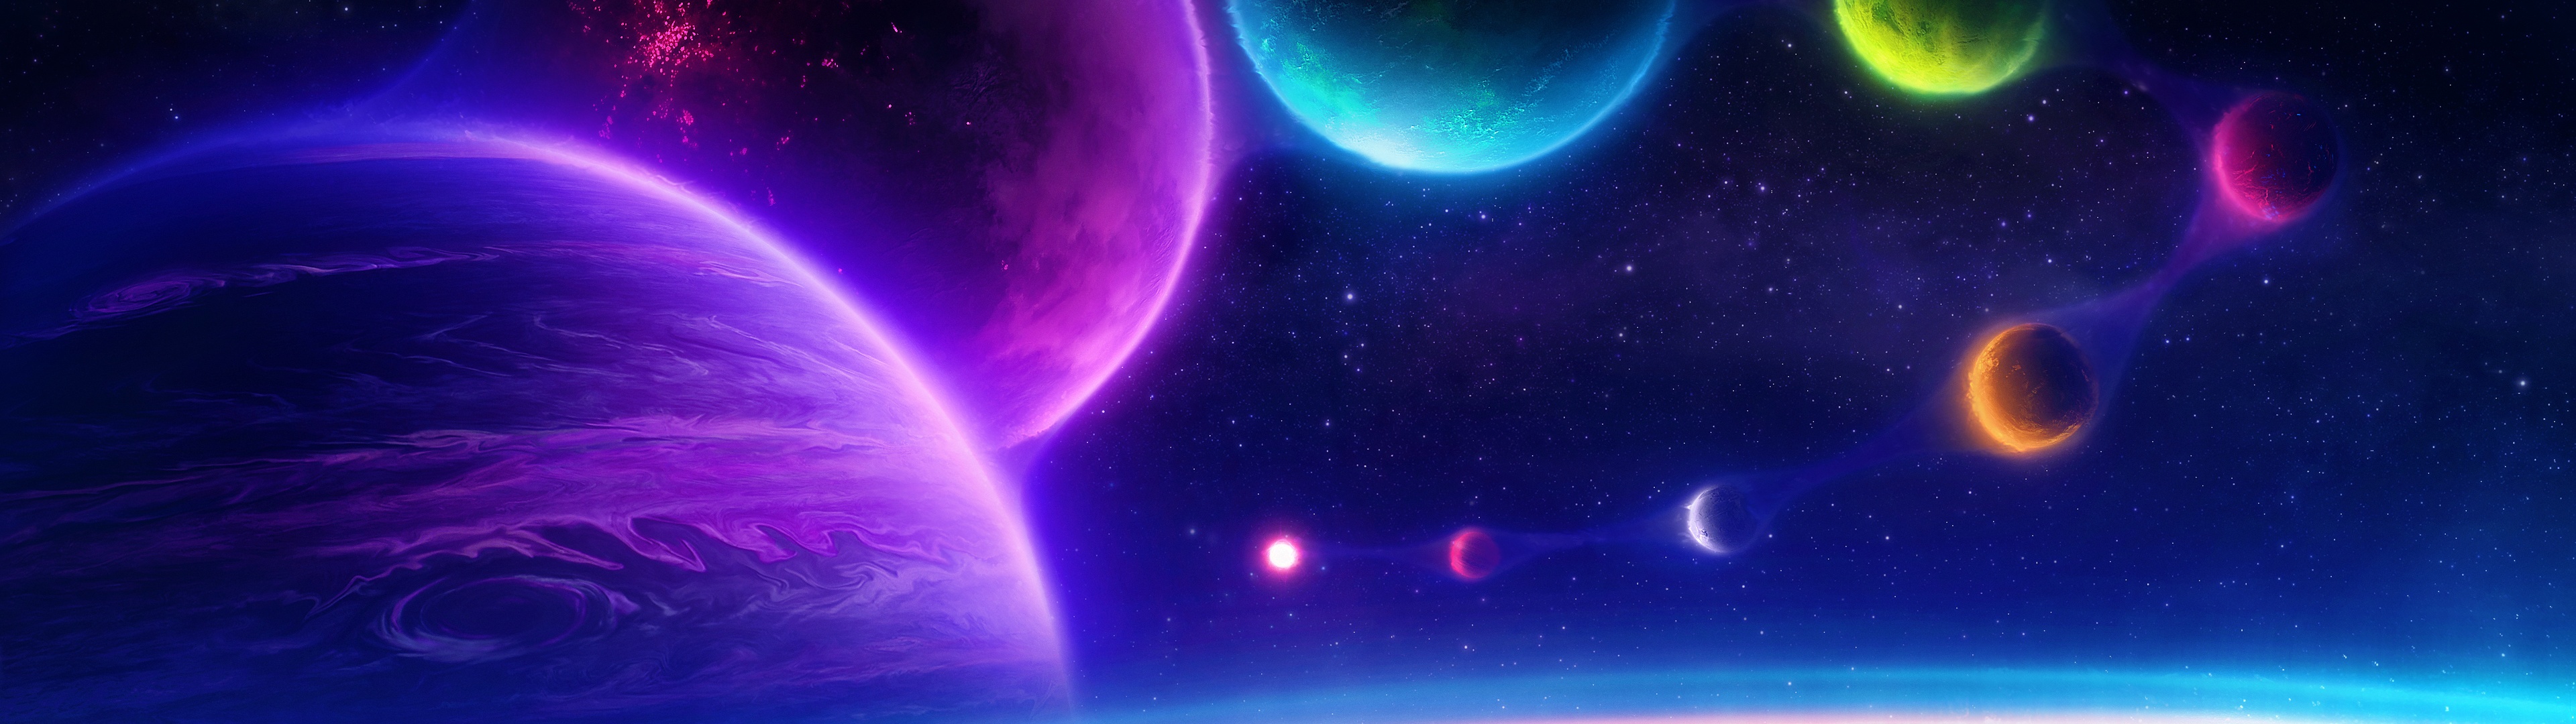 Dreamy Universe Aesthetic Planet Background Wallpaper Image For Free  Download  Pngtree